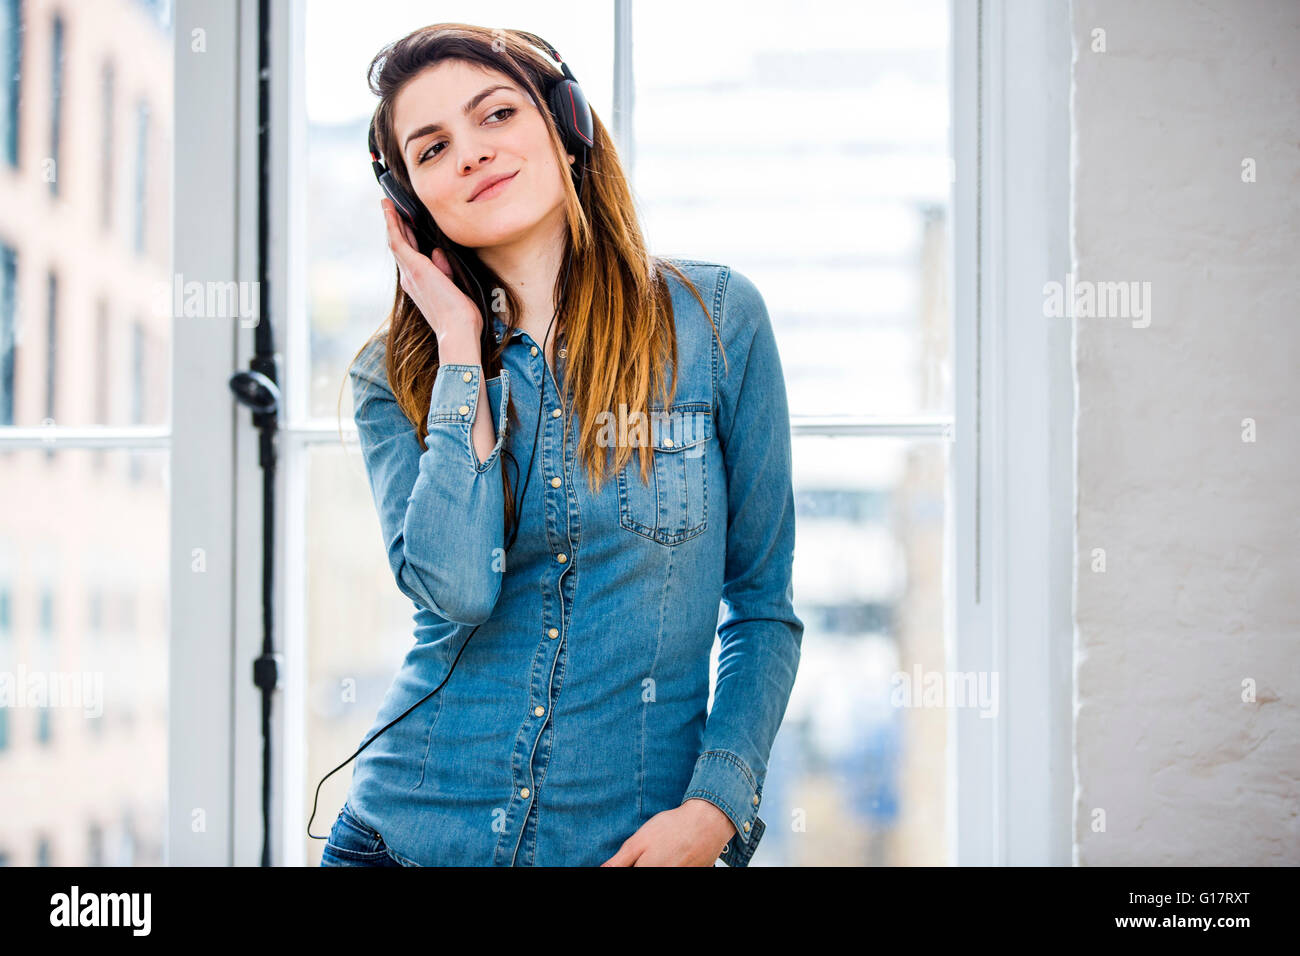 Beautiful young woman listening to music in front of city apartment window Stock Photo